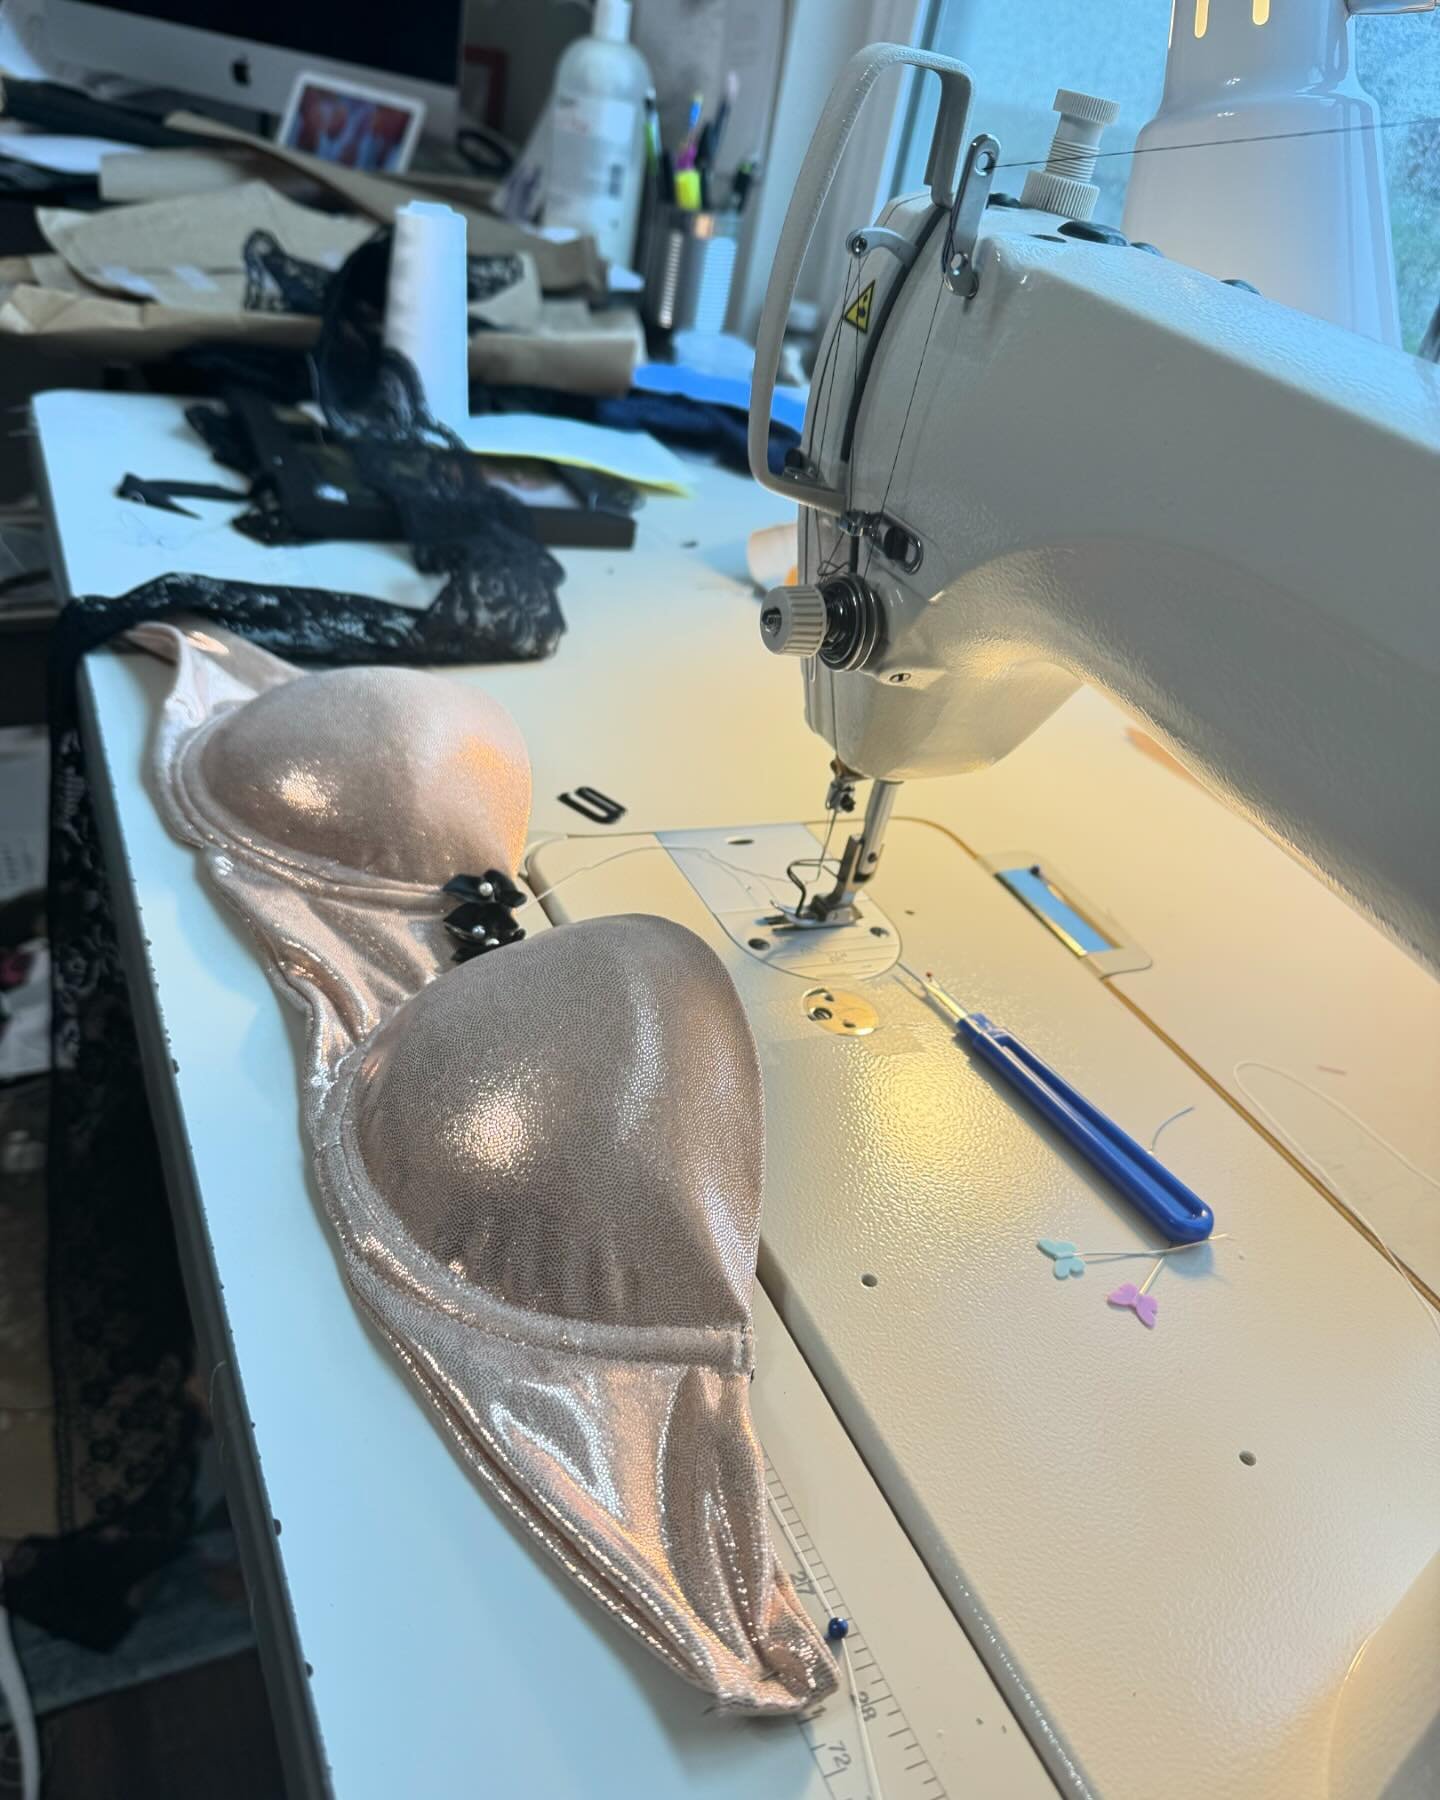 The highlight of my day is finishing up a custom order for such an amazing woman ✨!! The sound of my machine gracing the fabric is like music to my ears.
.
.
#sewingisart #theartofsewing #maker #creative #fashiondesigner #swimwithpoppies #fashion #cu